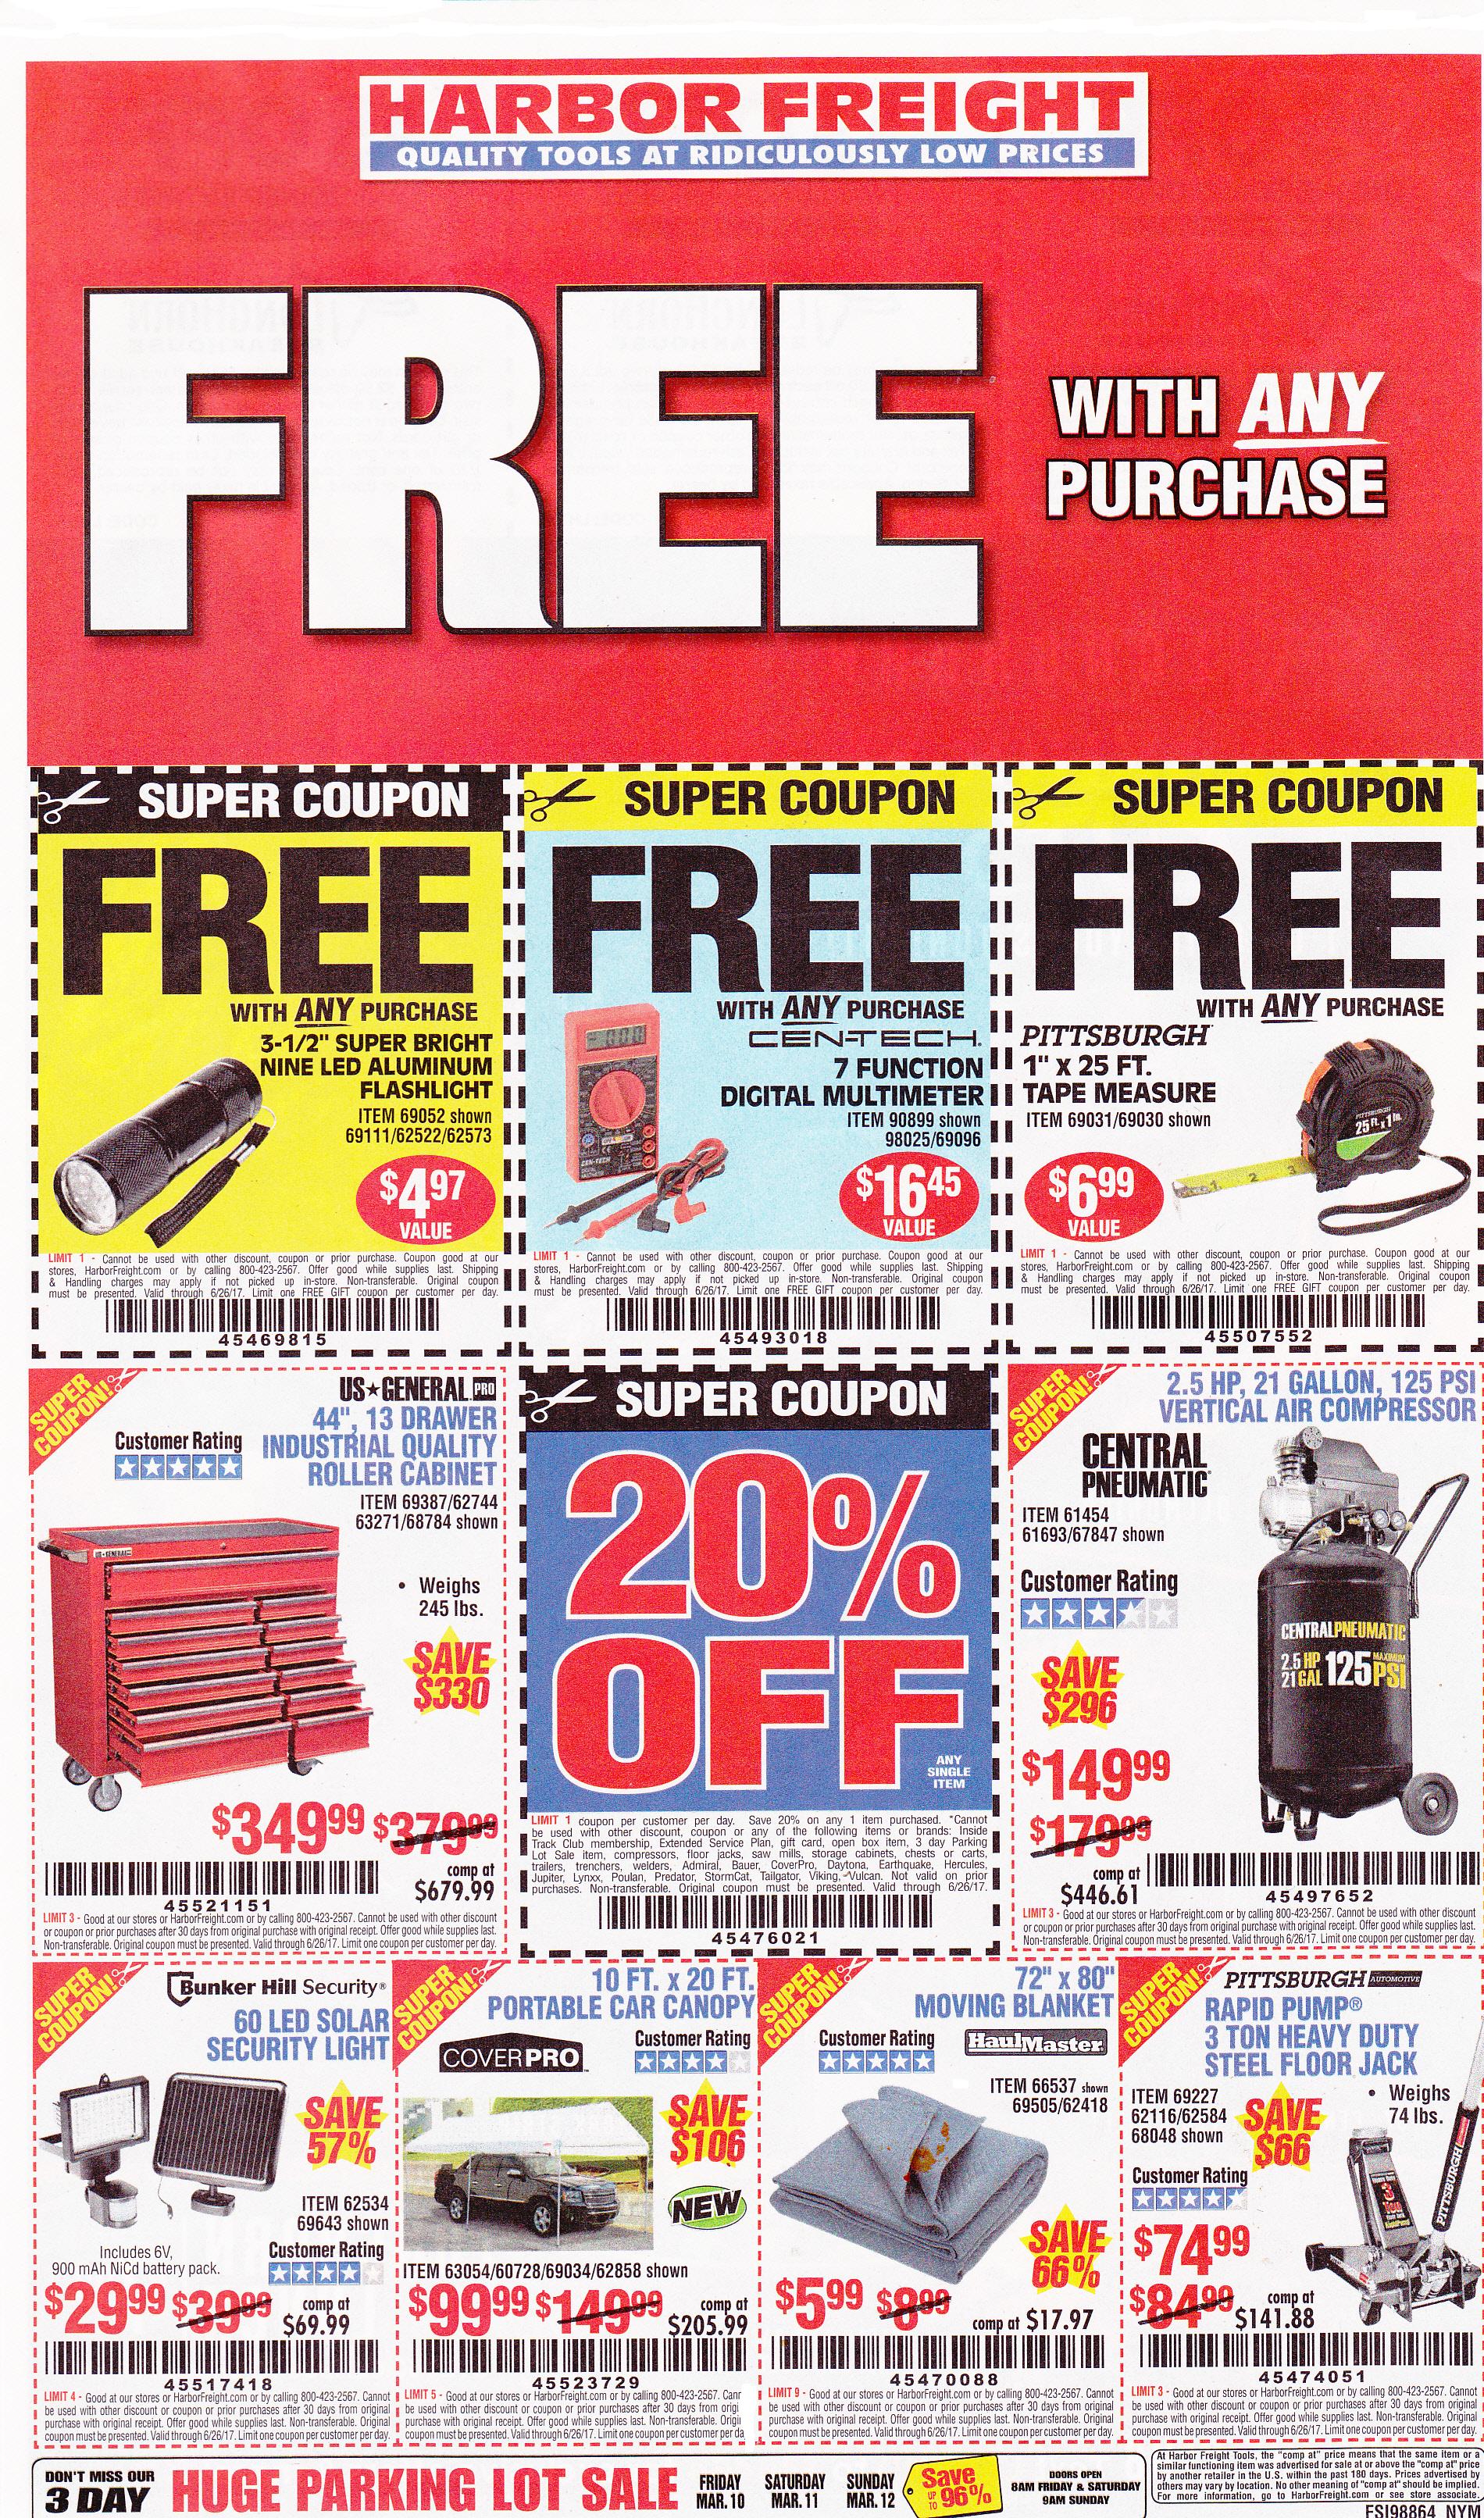 Harbor Freight coupons which expire on 6-26-2017 page 2..jpg